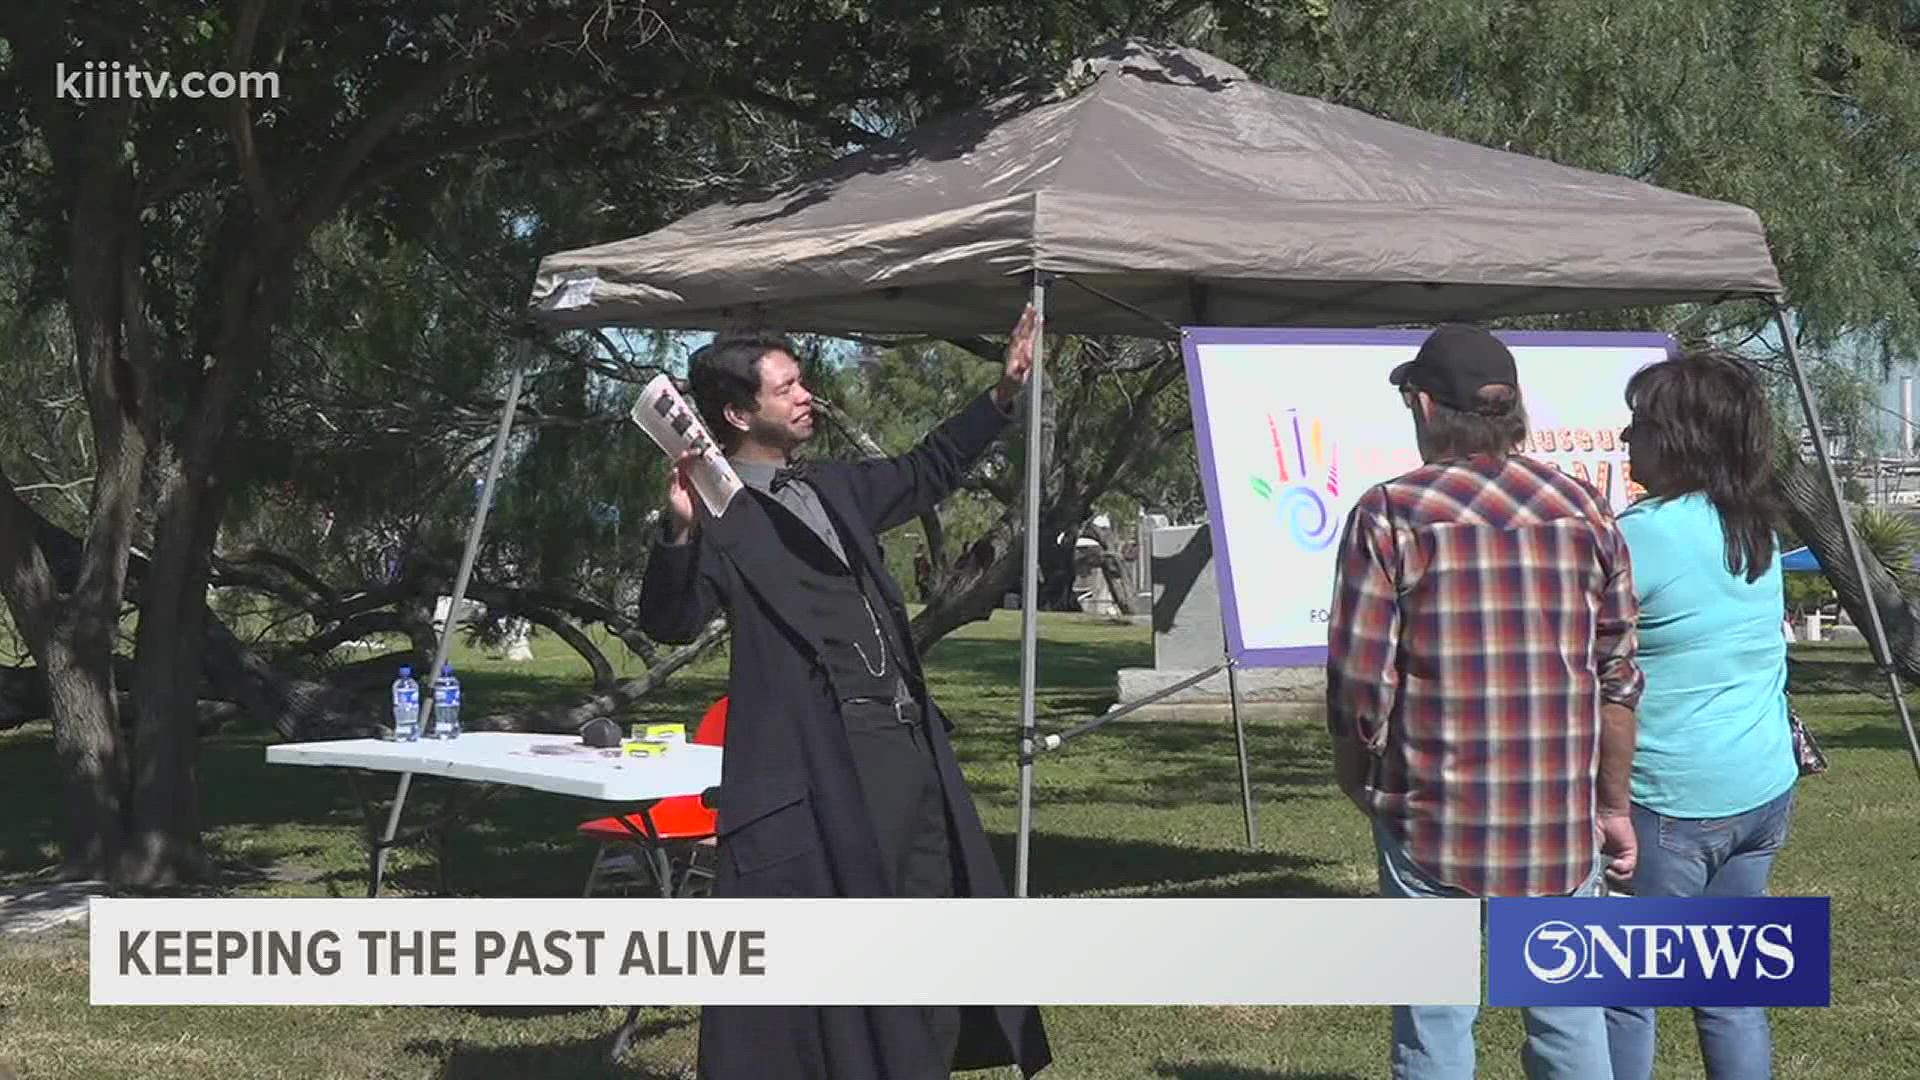 The event was held from the oldest federal military cemetery in Texas.